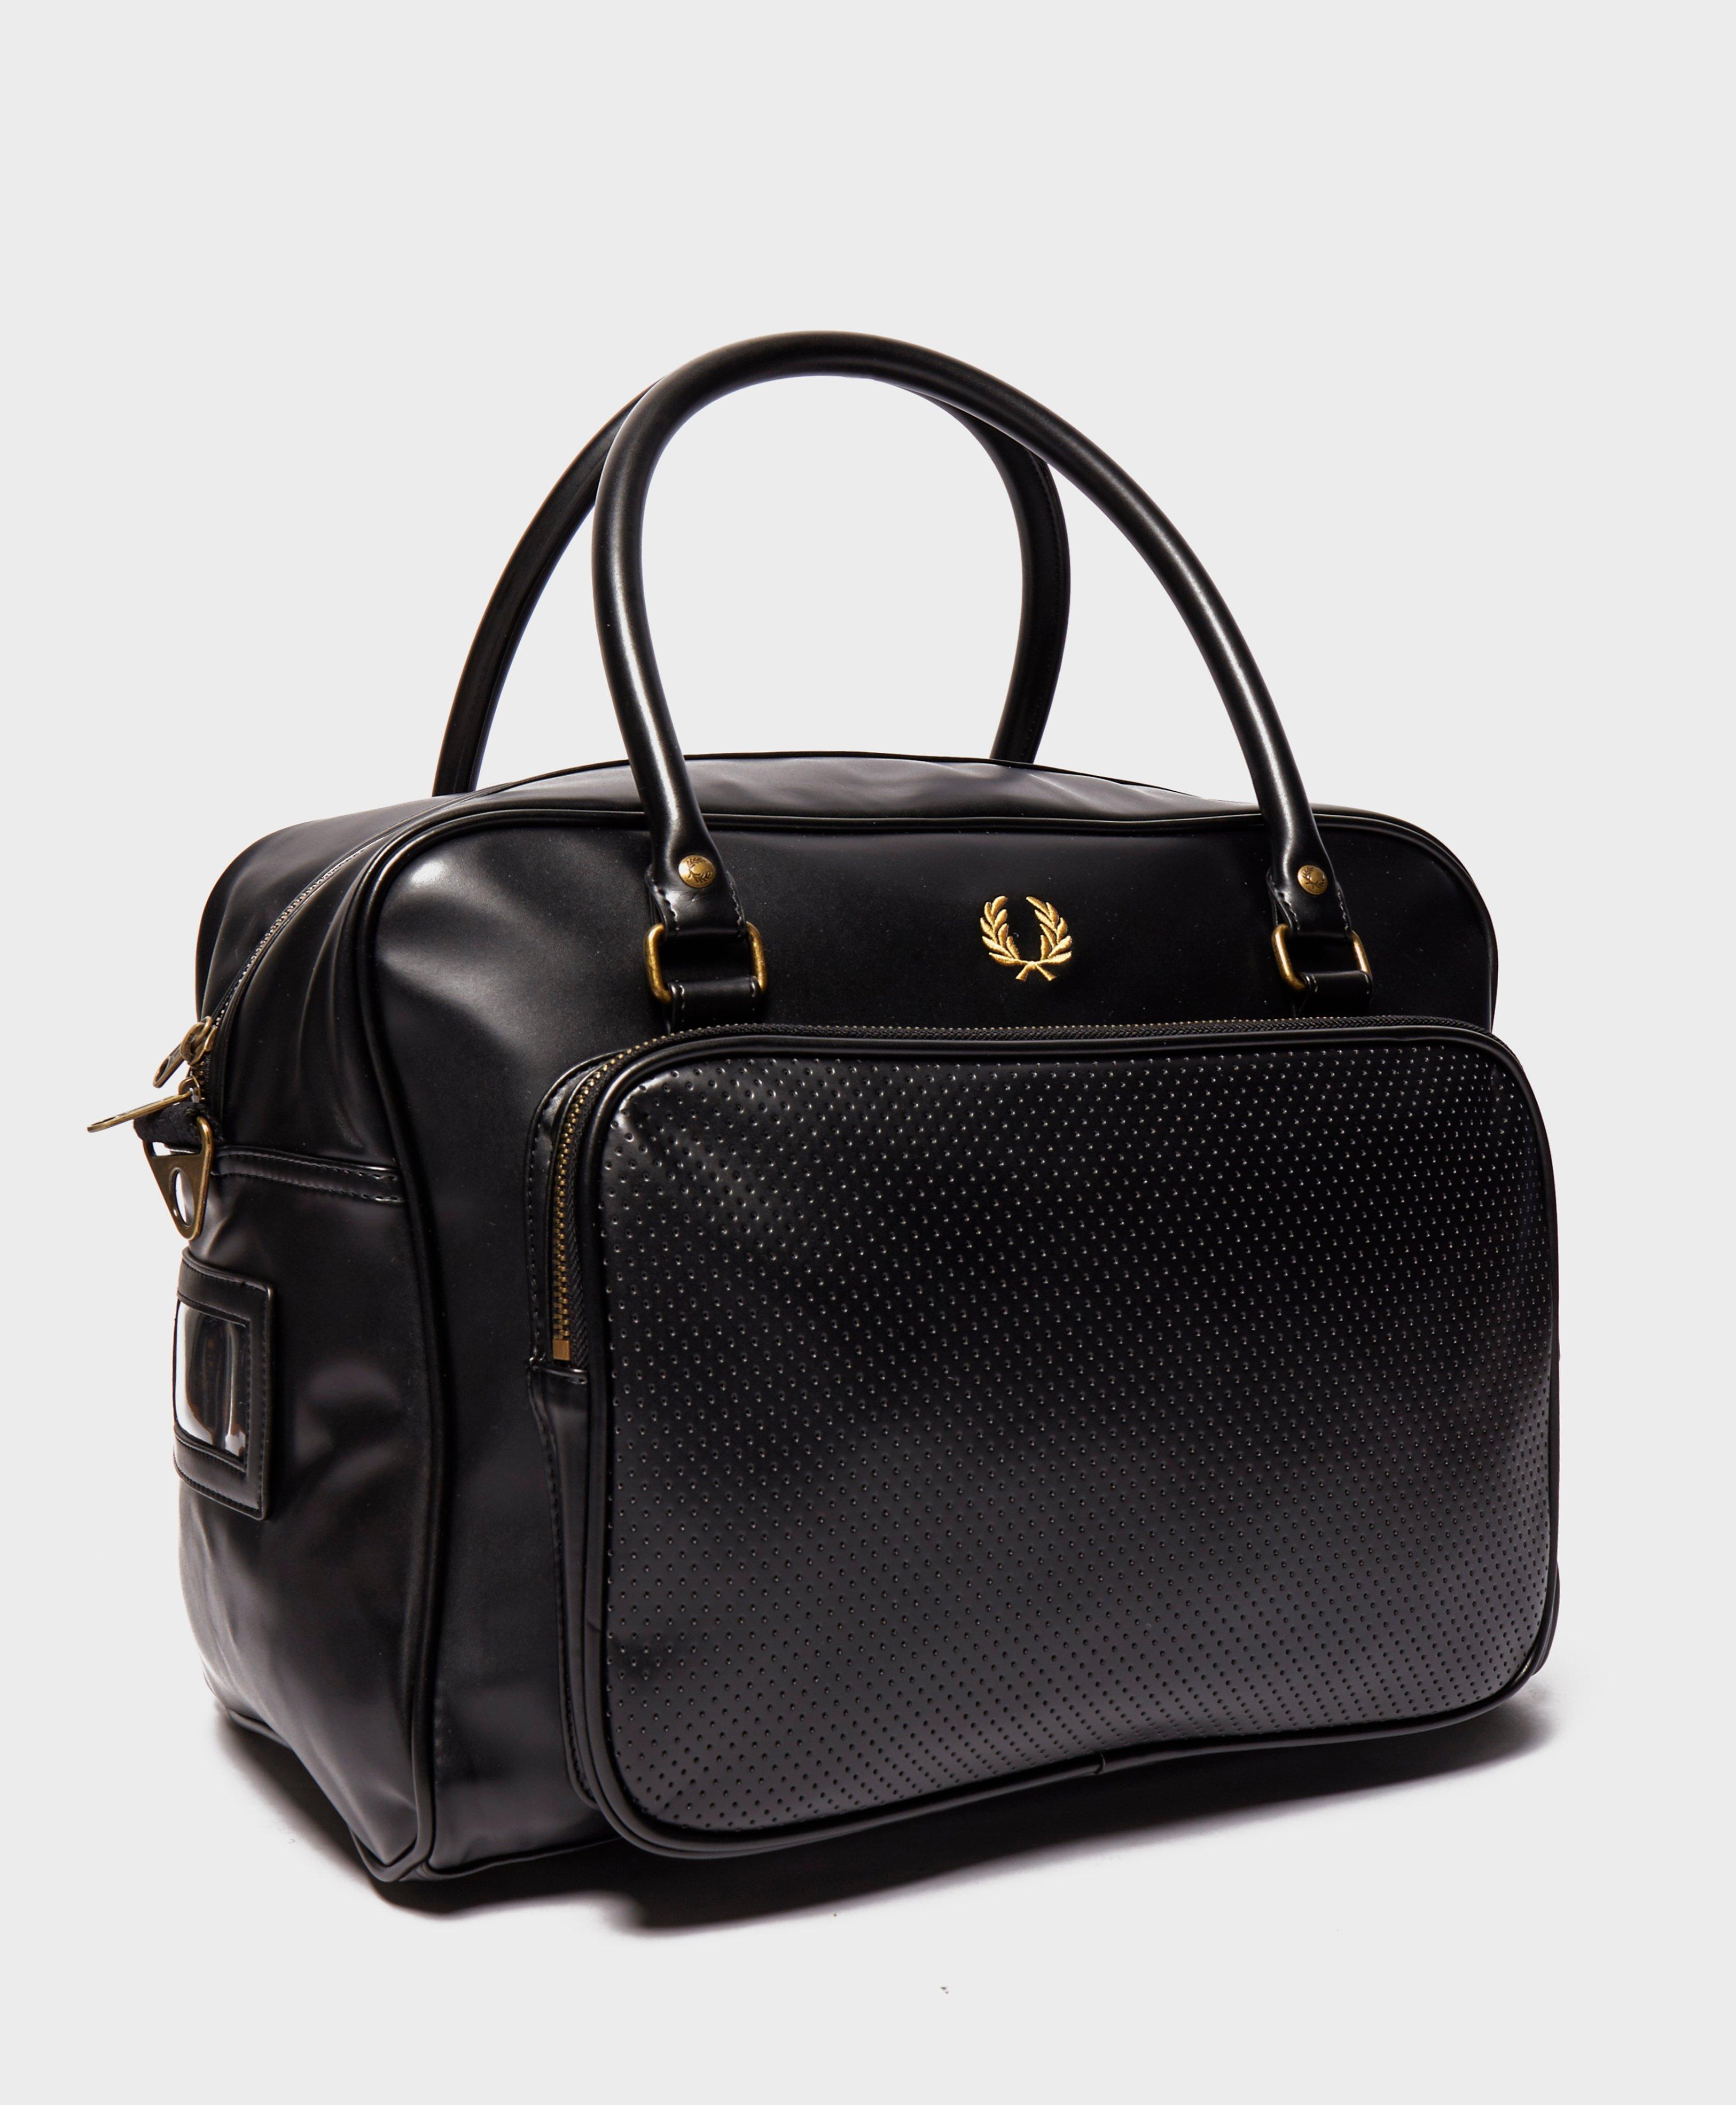 Fred Perry Holdall Bag in Black for Men - Lyst